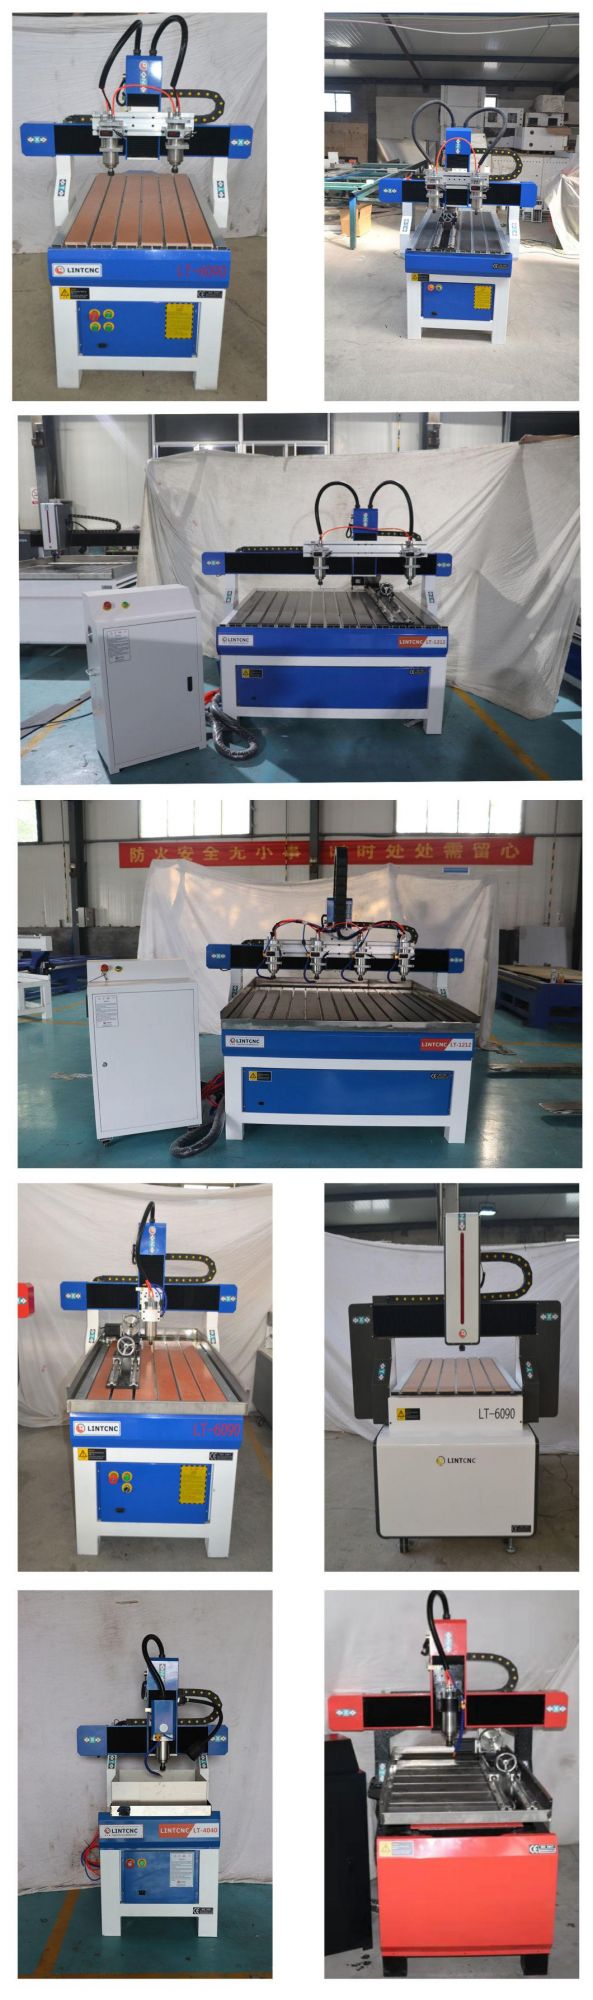 2021 Chinese Advertising CNC Router 6090/4040 Mini Wood Design Cutting Machine CNC Kit 3 Axis for PCB/PVC /MDF/Aluminum Carving